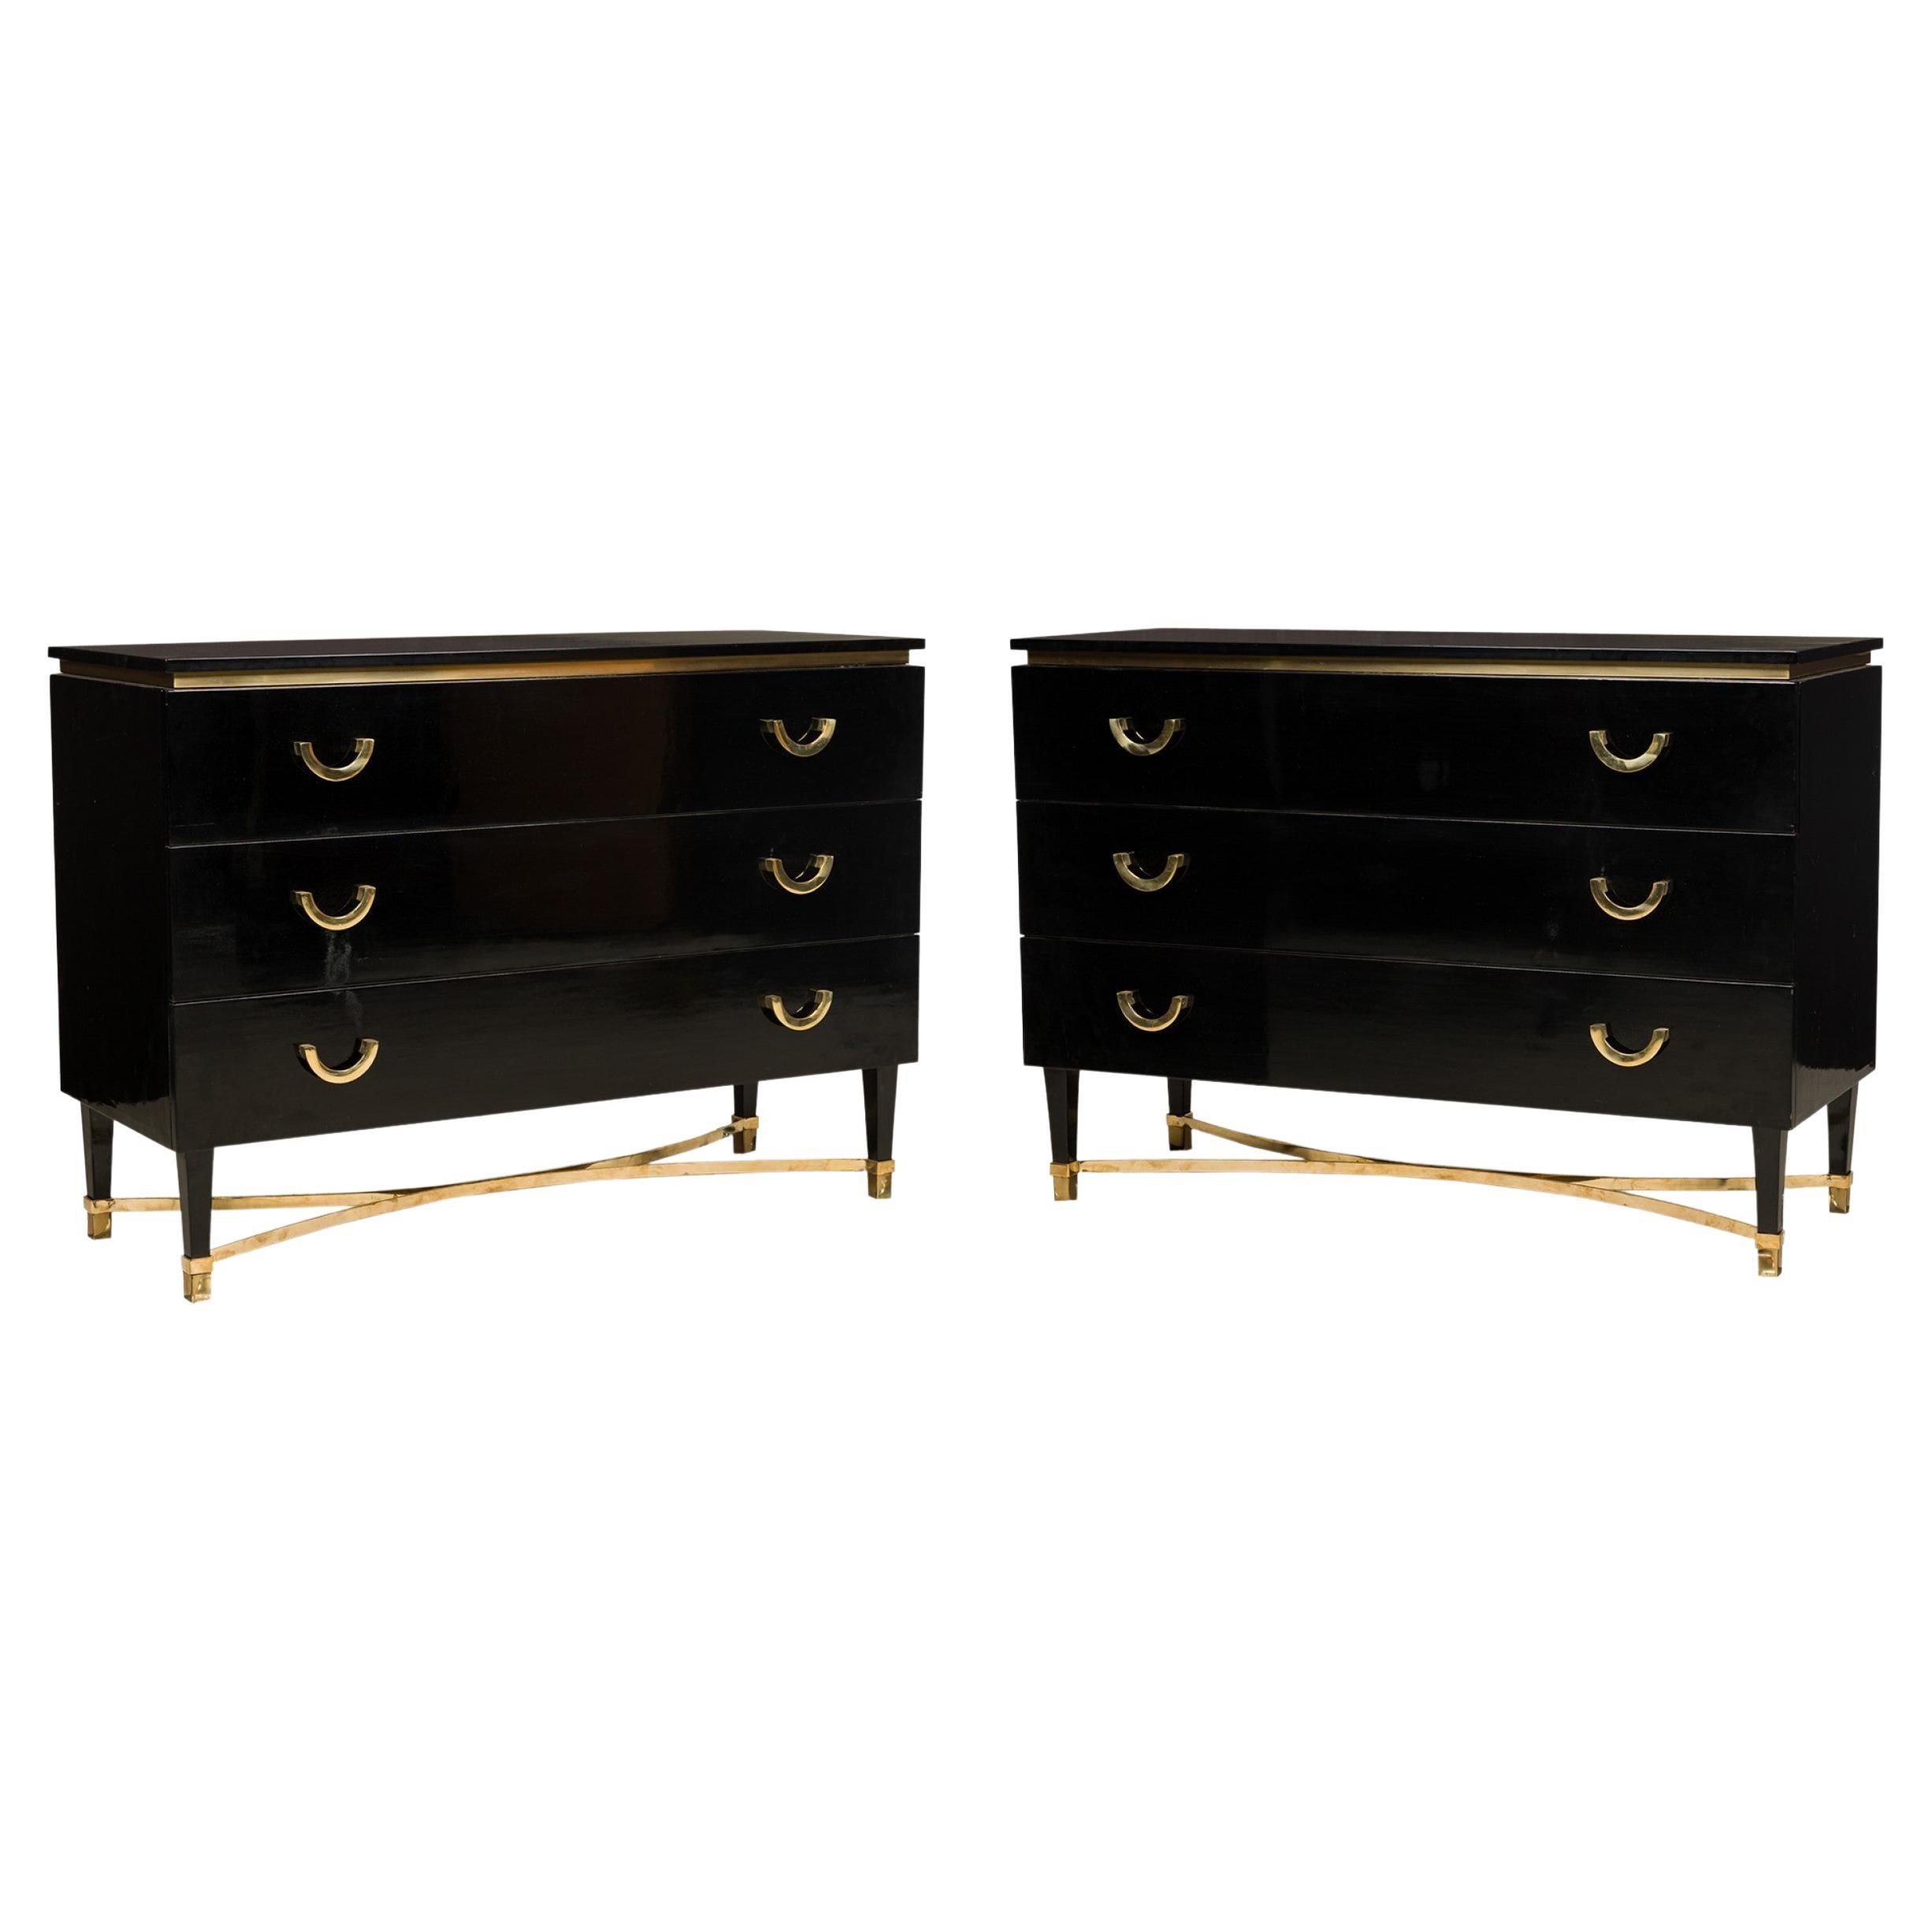 Pair of Midcentury Ebonized Wood & Bronze Mounted Dressers 'Manner of Gucci'